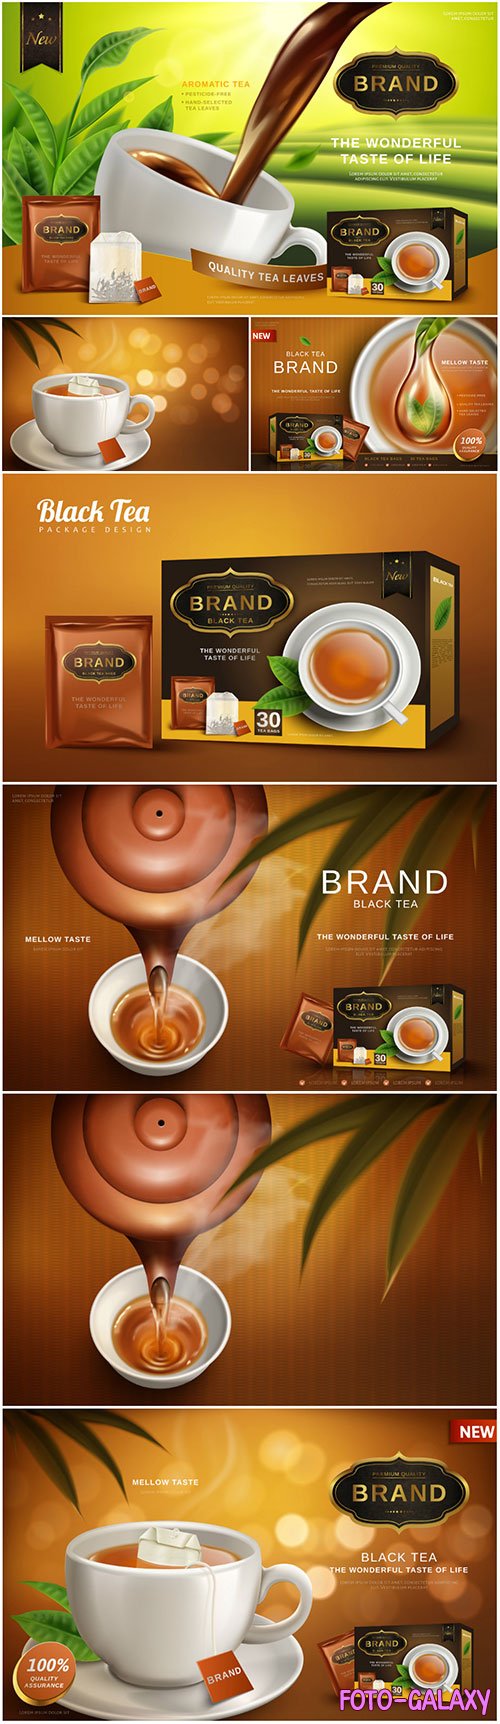 Black tea ad, with tea leaves and package box